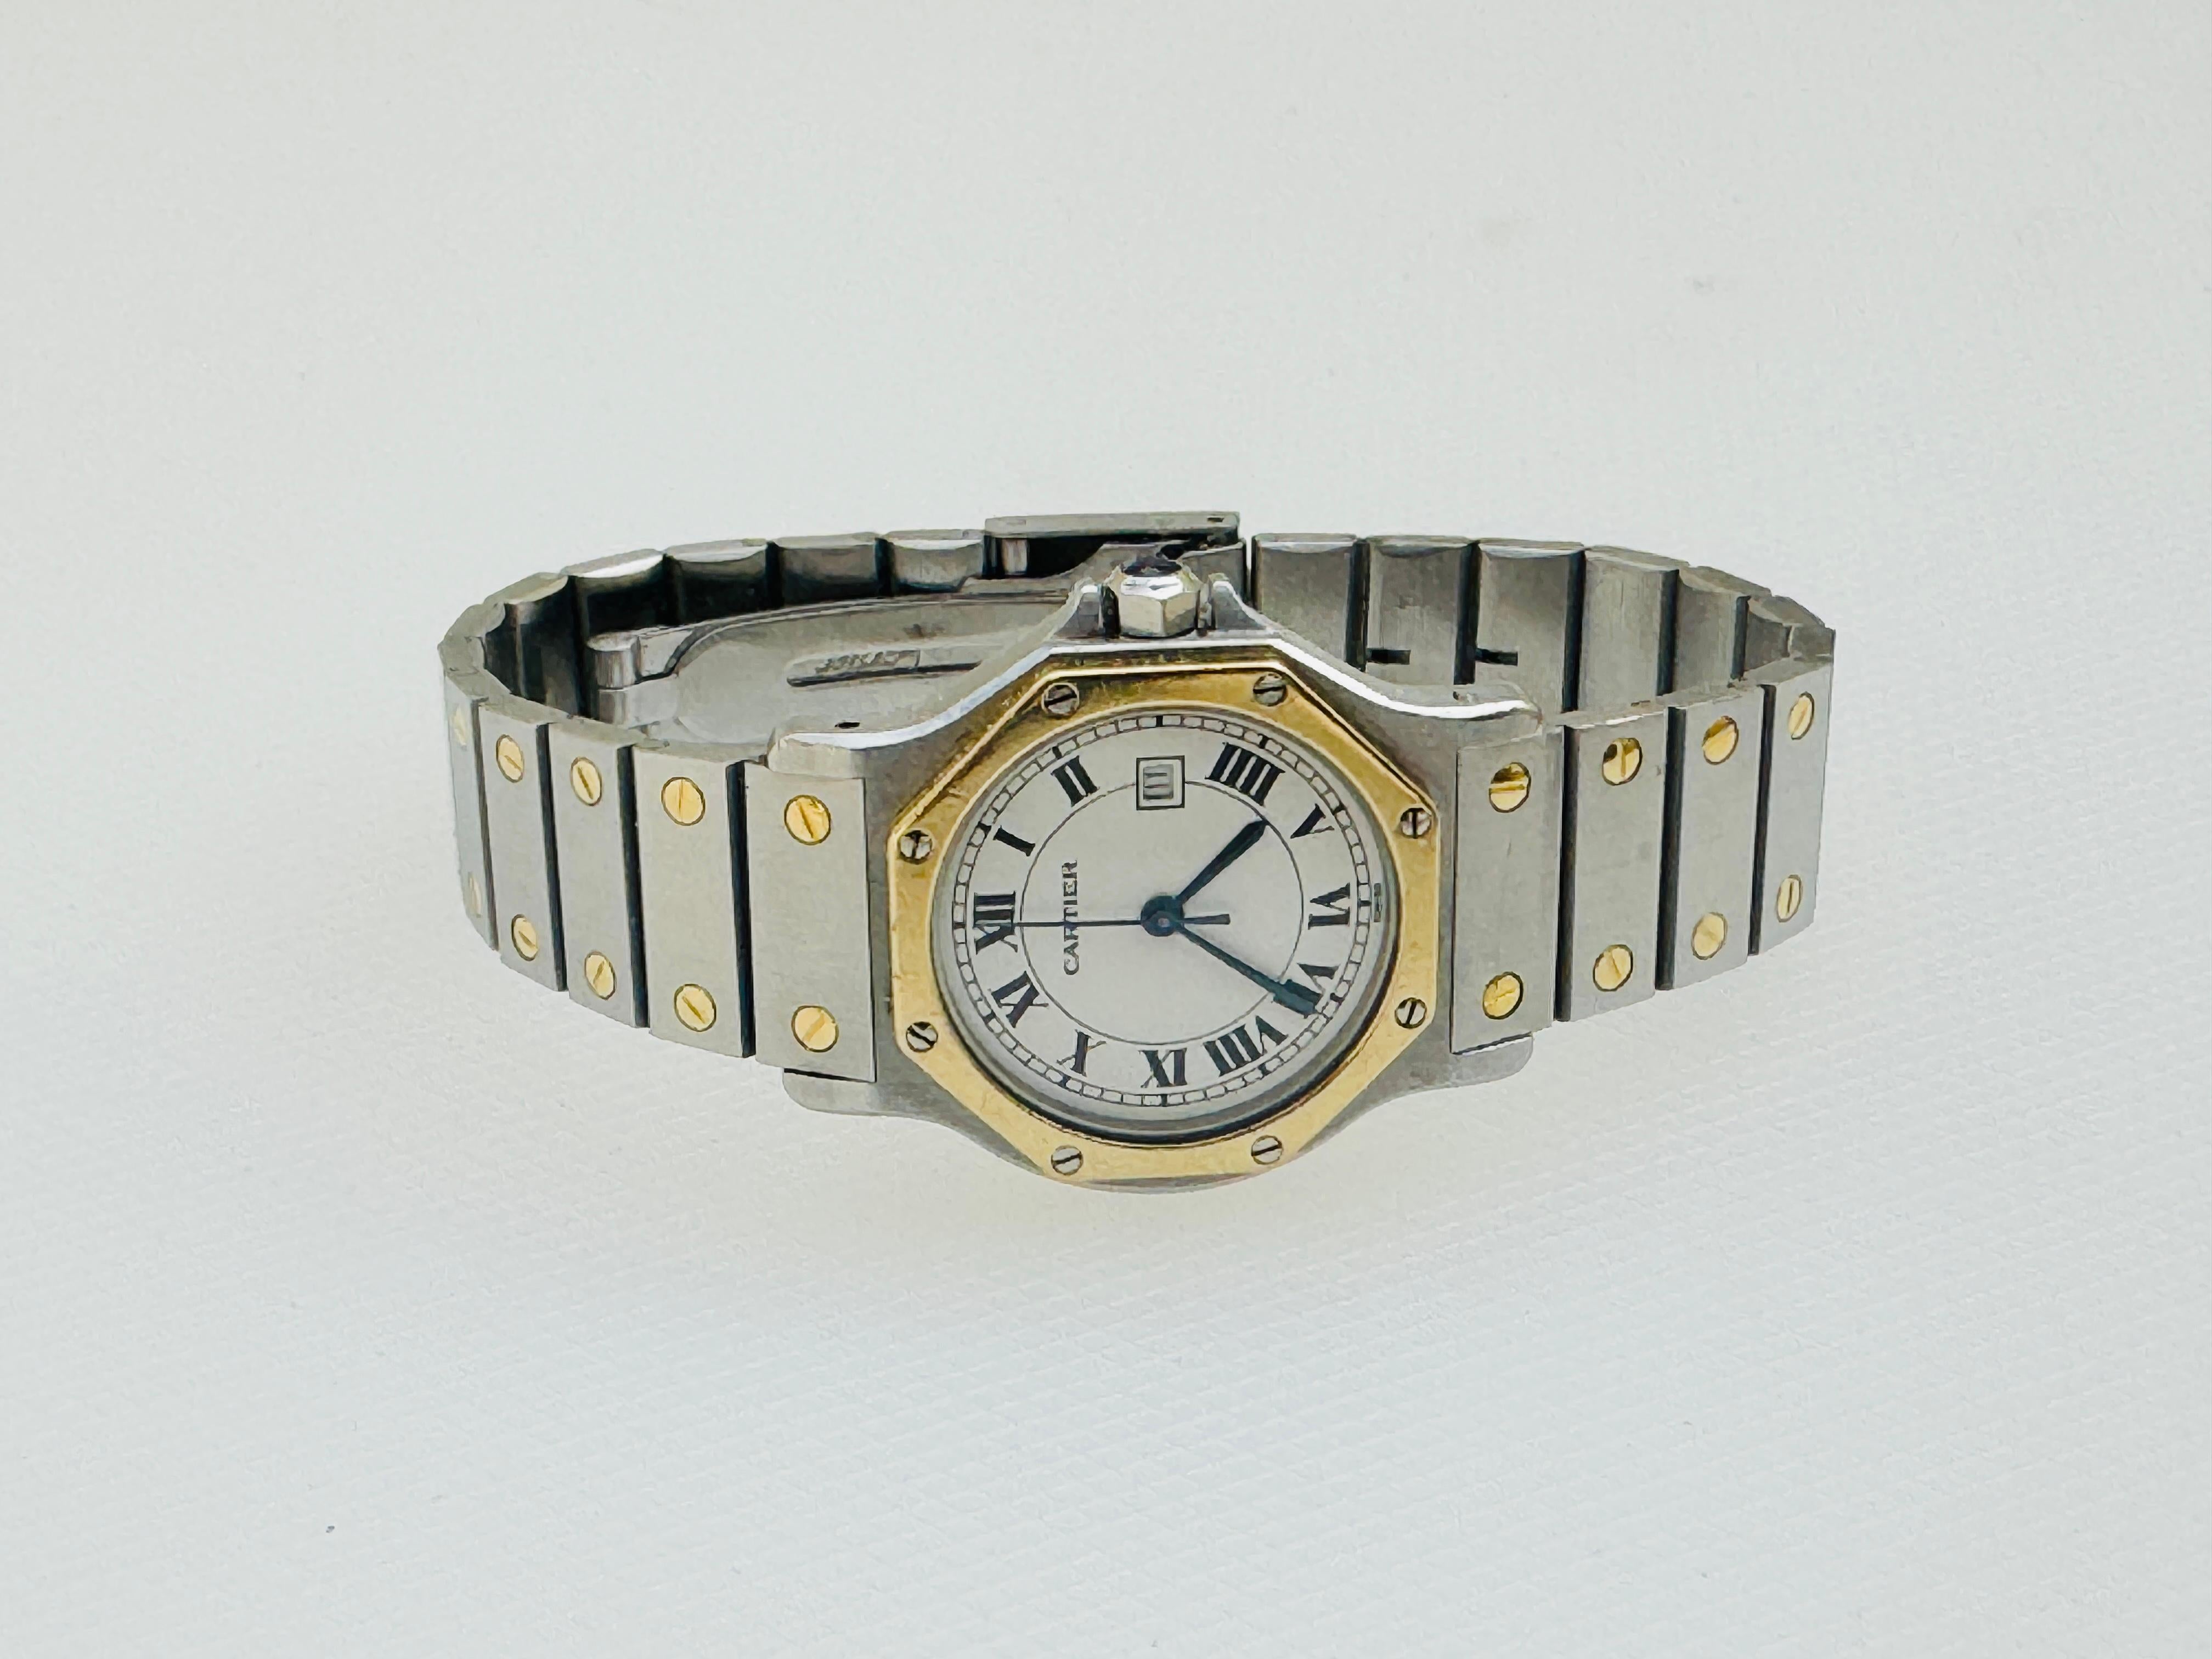 Cartier Santos Octagon 29662 Gold/Steel Watch Boxed For Sale 11